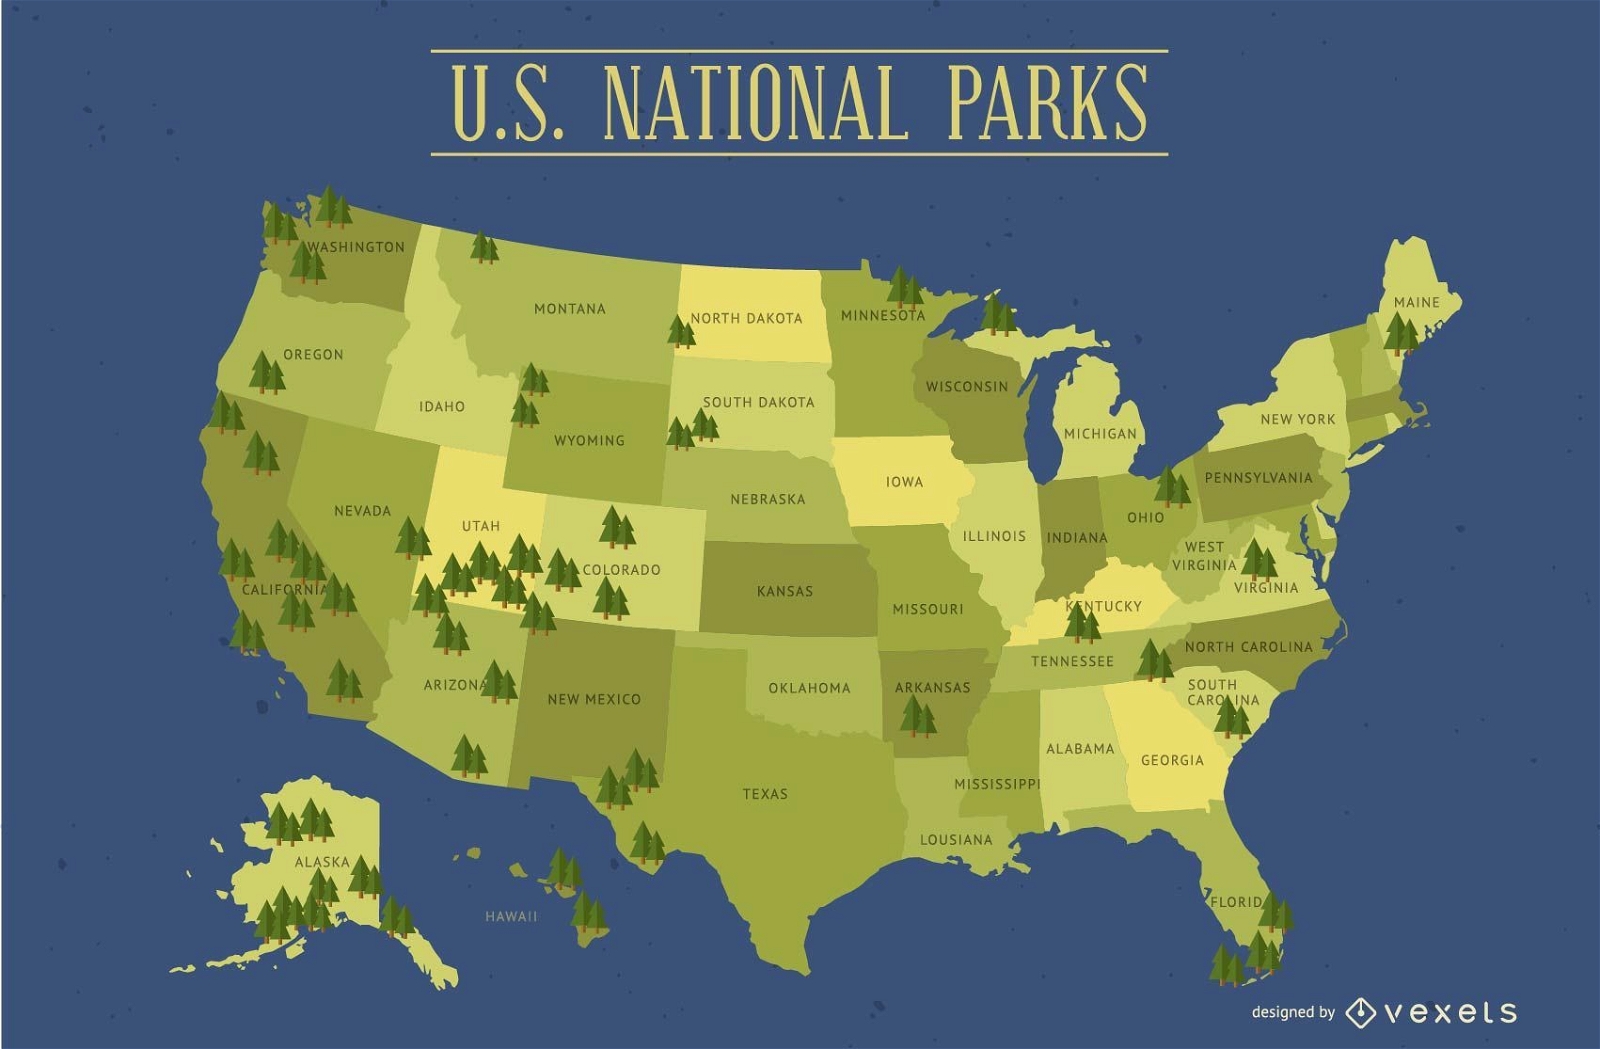 United States National Parks Map A1b7f4 